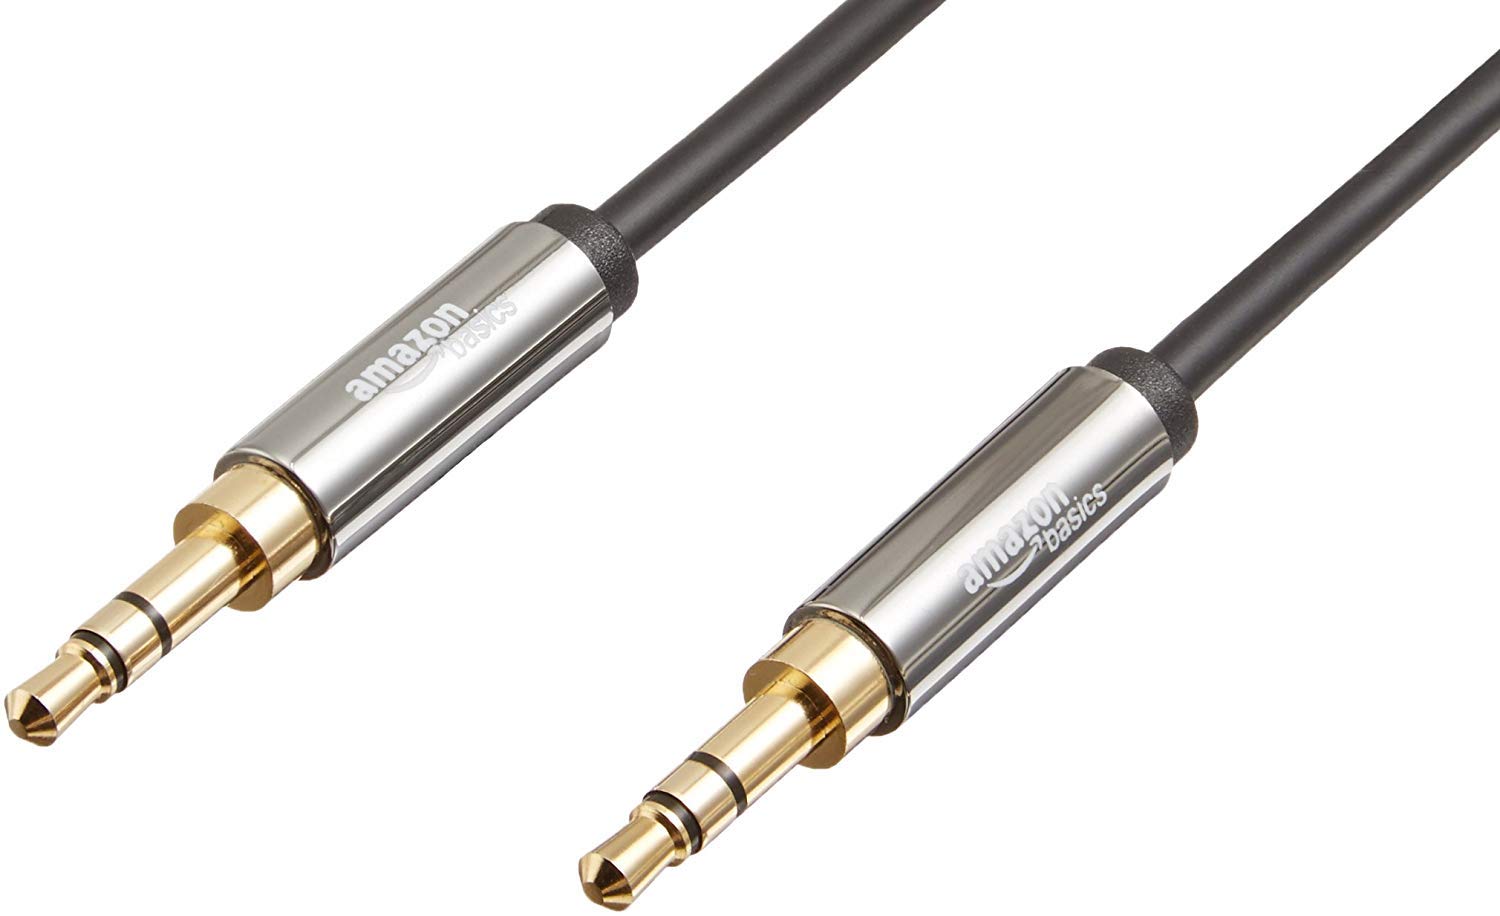 Amazon Basics 3.5mm Aux Audio Cable for Stereo Speaker or Subwoofer with Gold-Plated Plugs, 8 Foot, Black